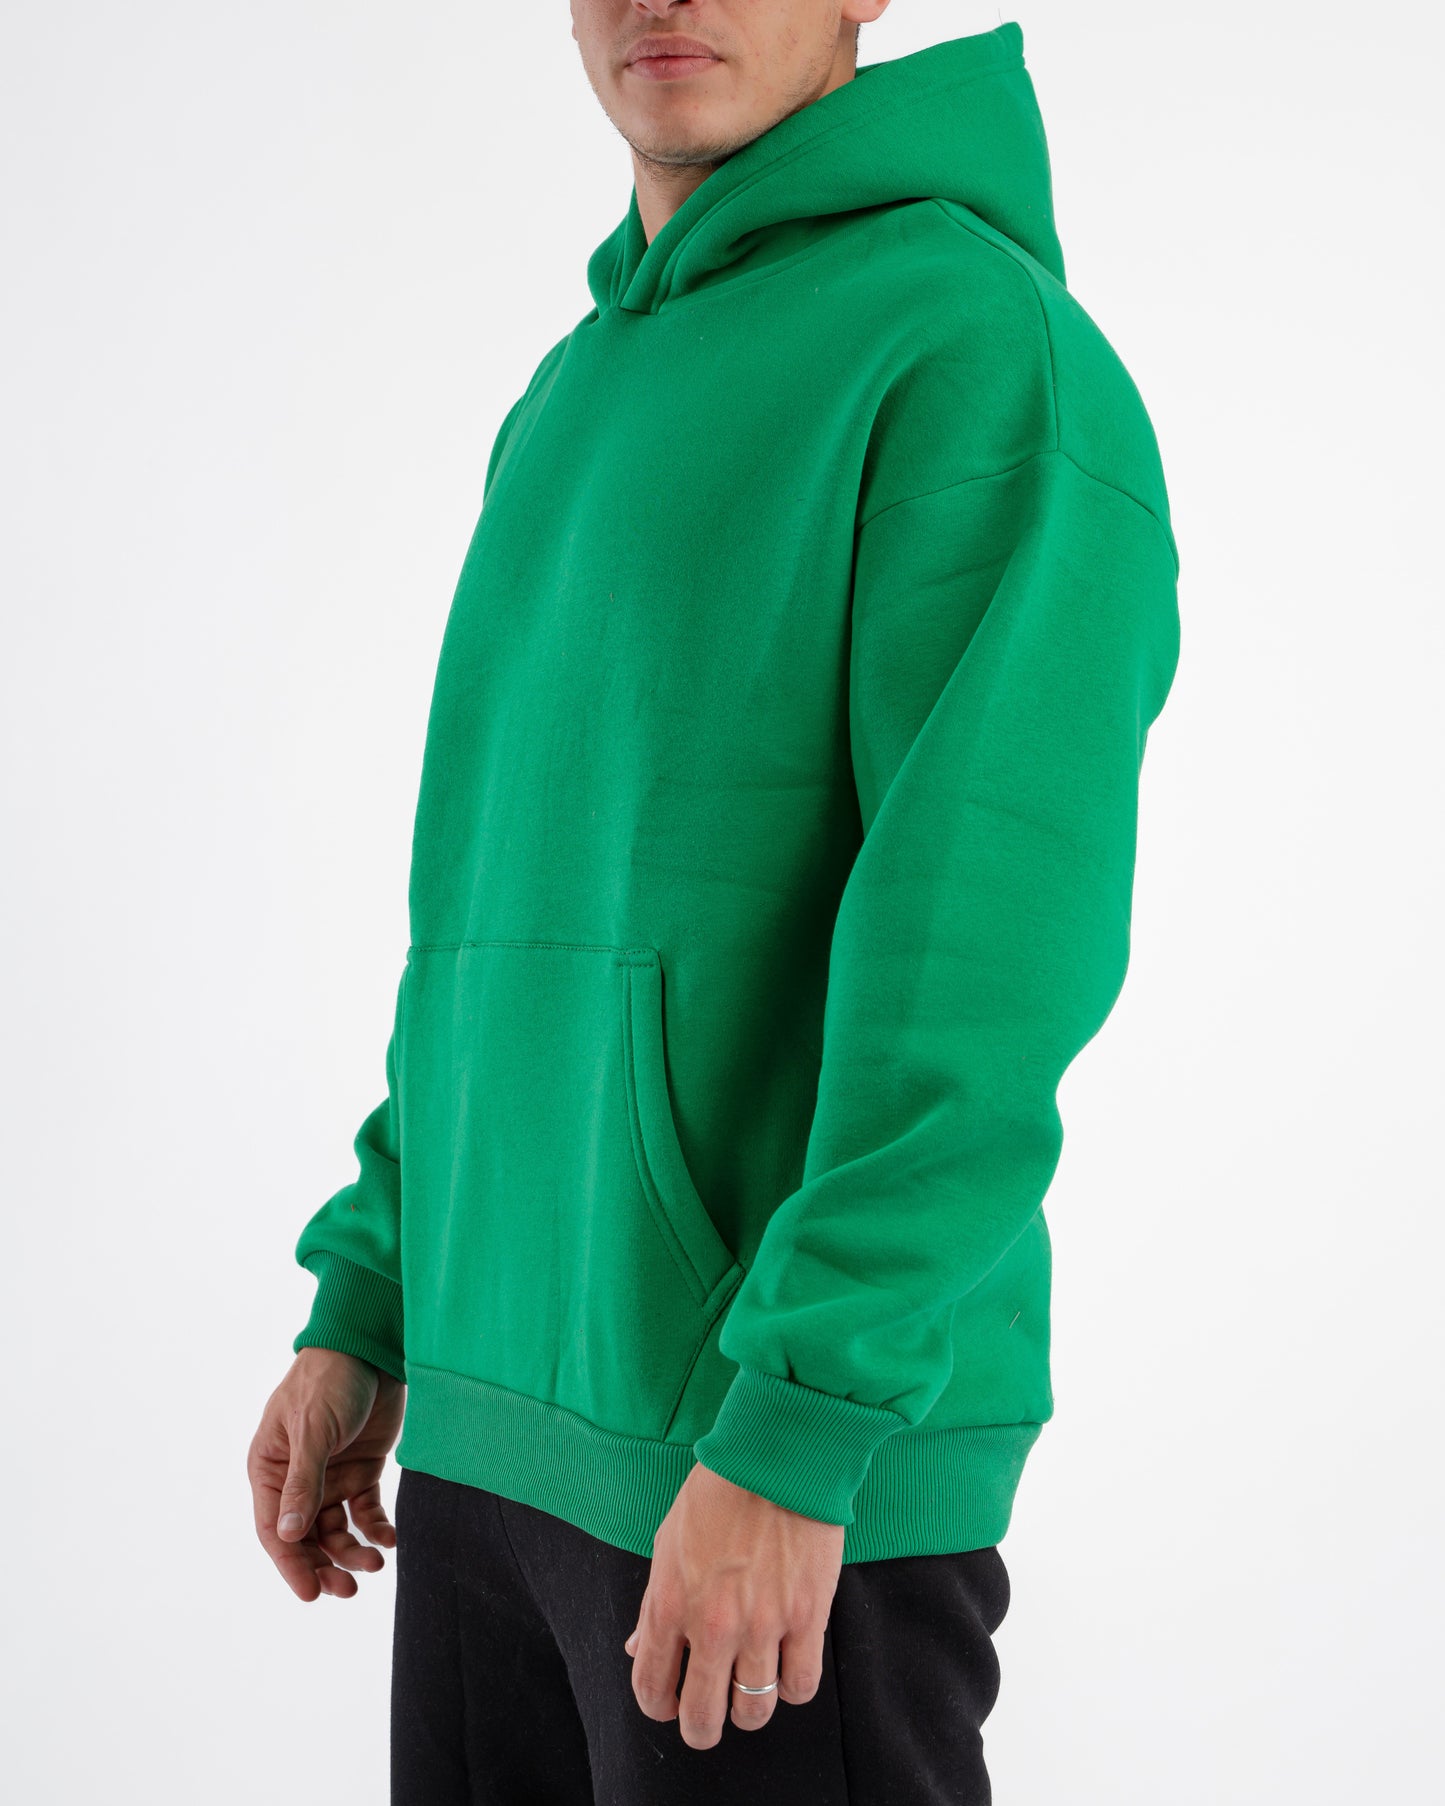 GREEN OVER-SIZED HOODIE